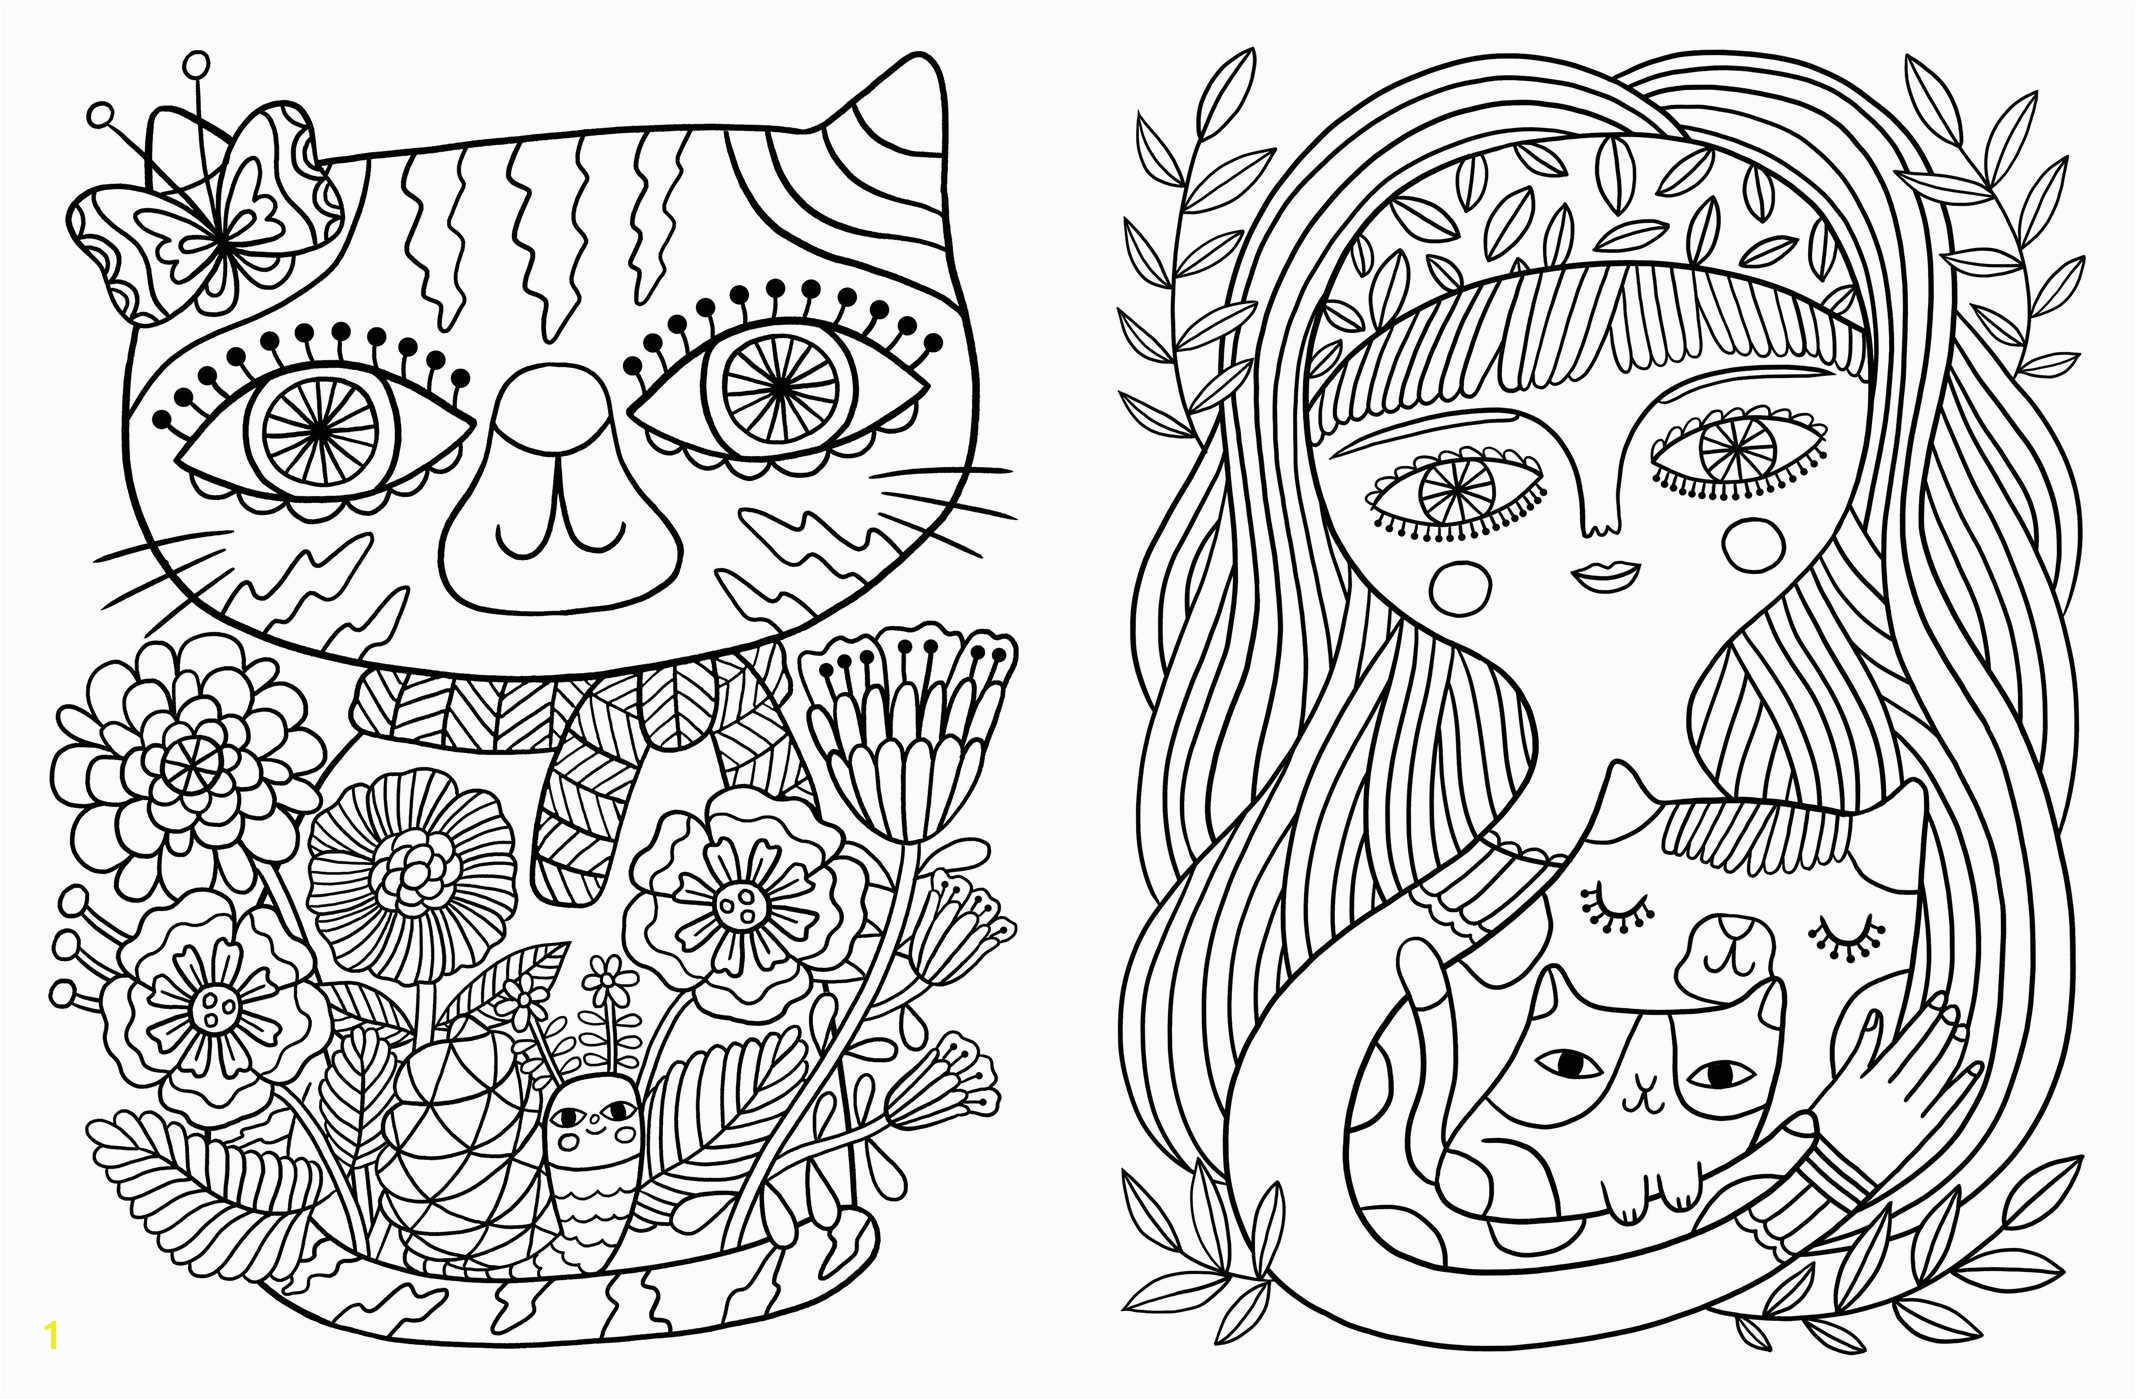 Kitty Cat Coloring Pages to Print Kitty Cat Coloring Pages Awesome Cool Free Coloring Pages Kitty New